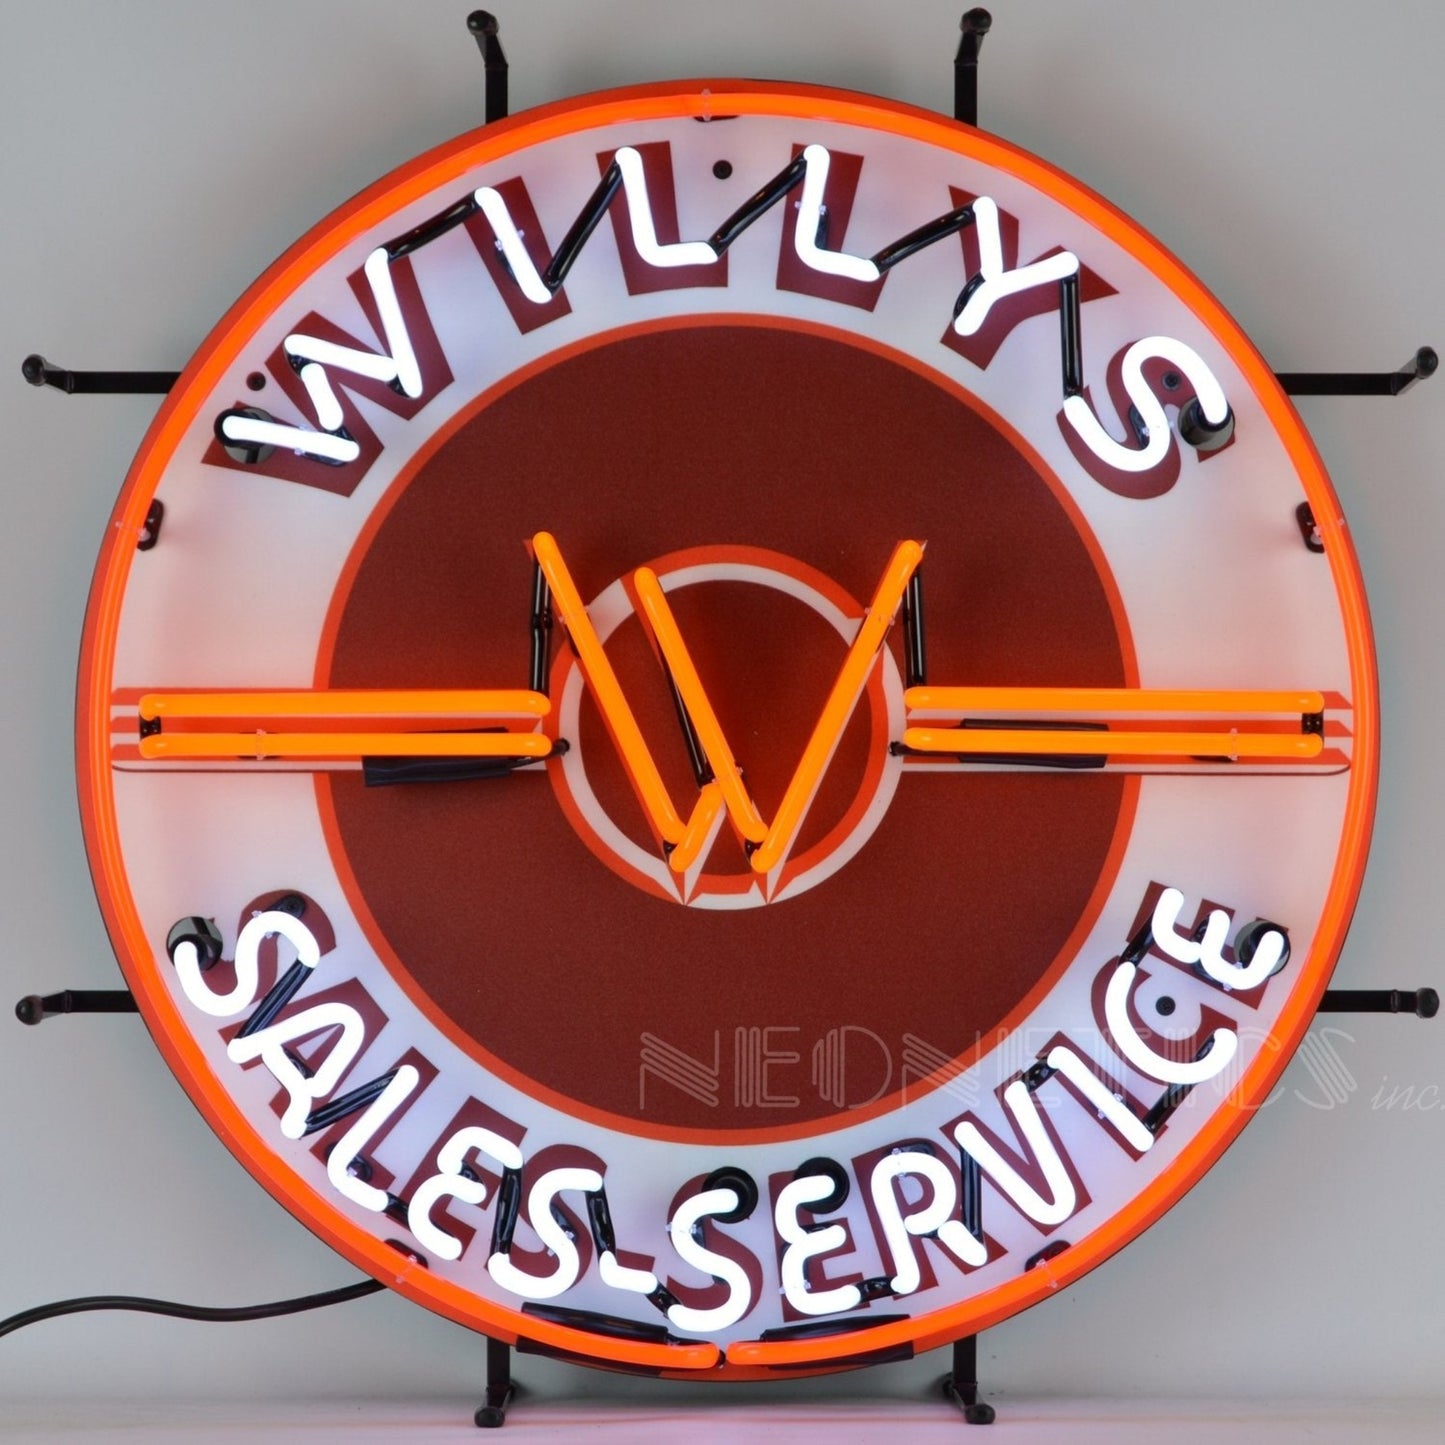 Vintage-inspired Jeep Willys Sales Service Neon Sign with classic white and orange neon tubes, perfect for adding a historical touch to a man cave or office.